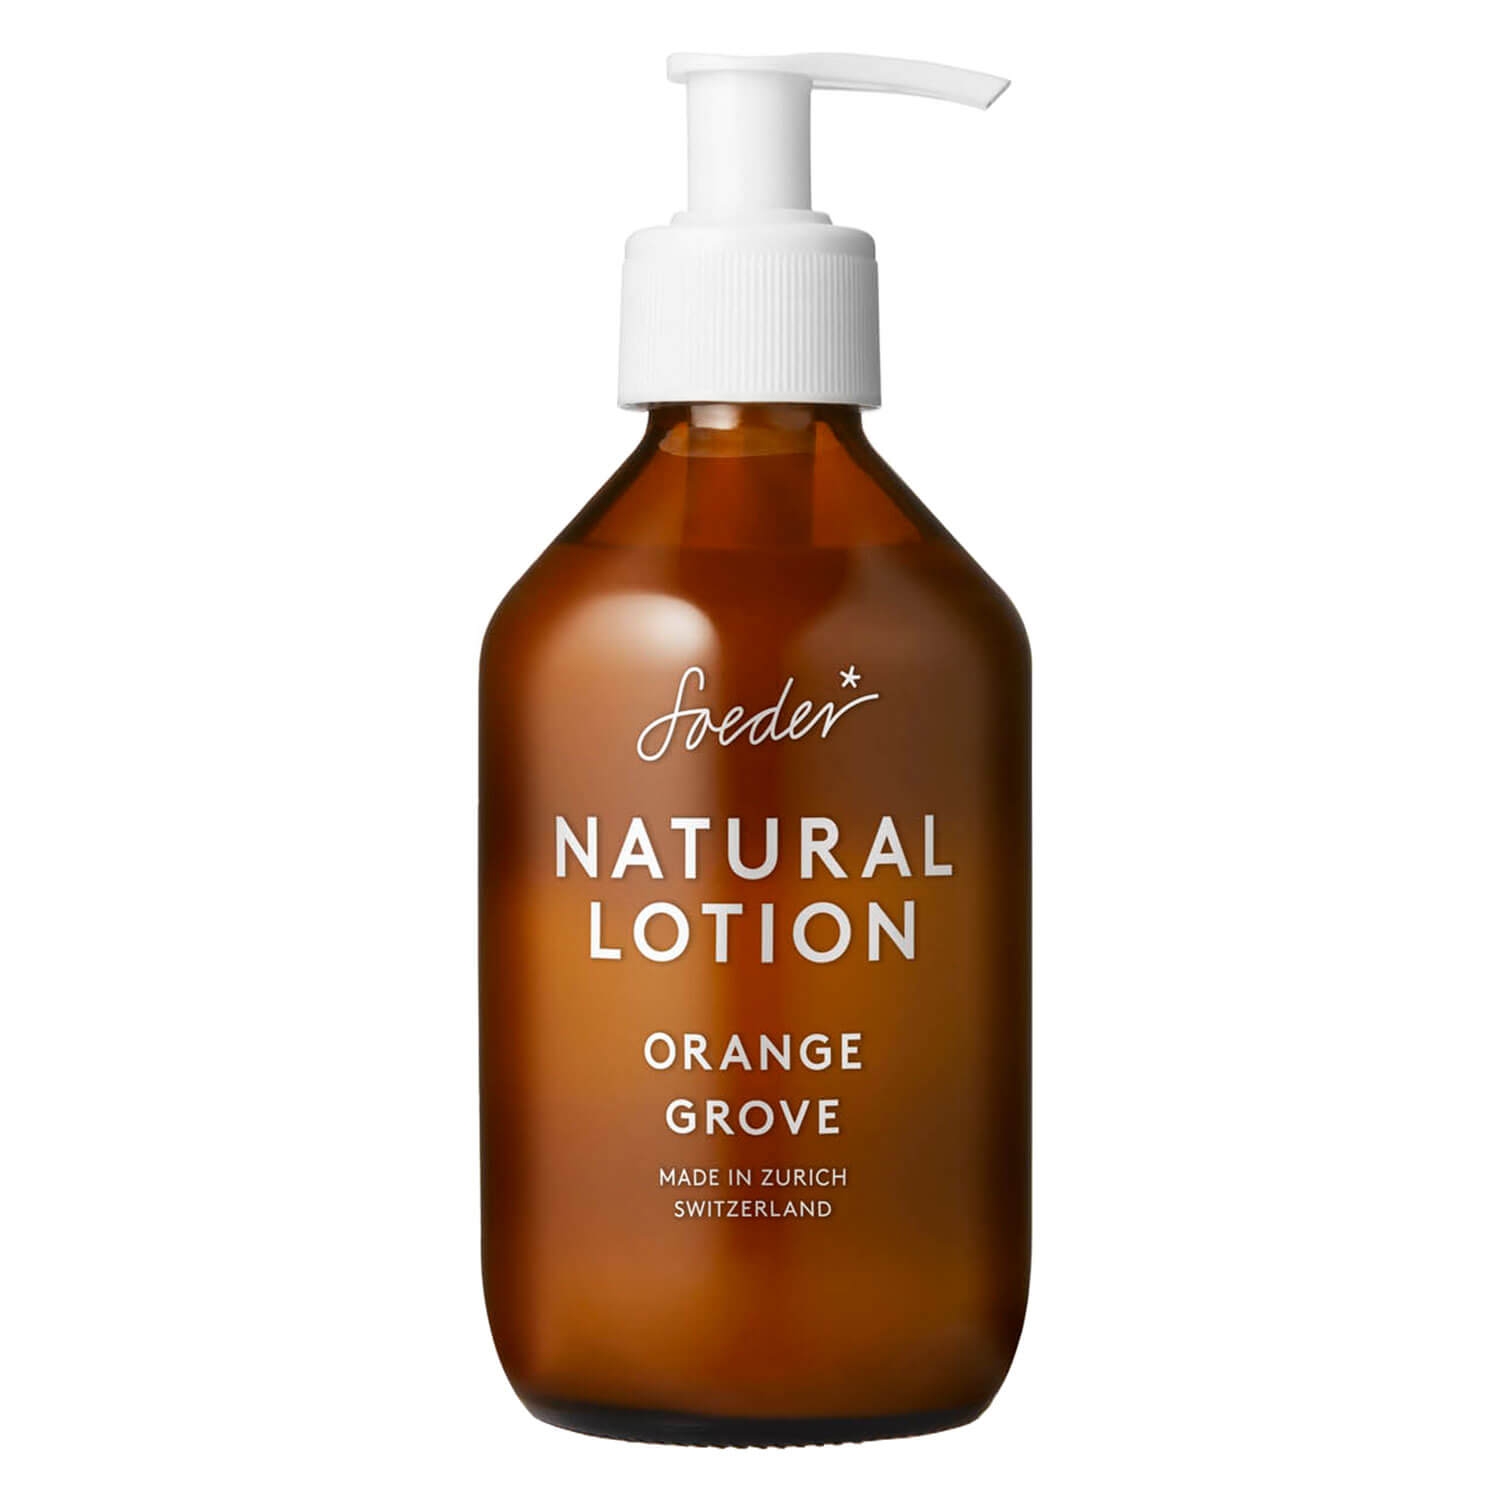 Product image from Soeder - Natural Lotion Orange Grove